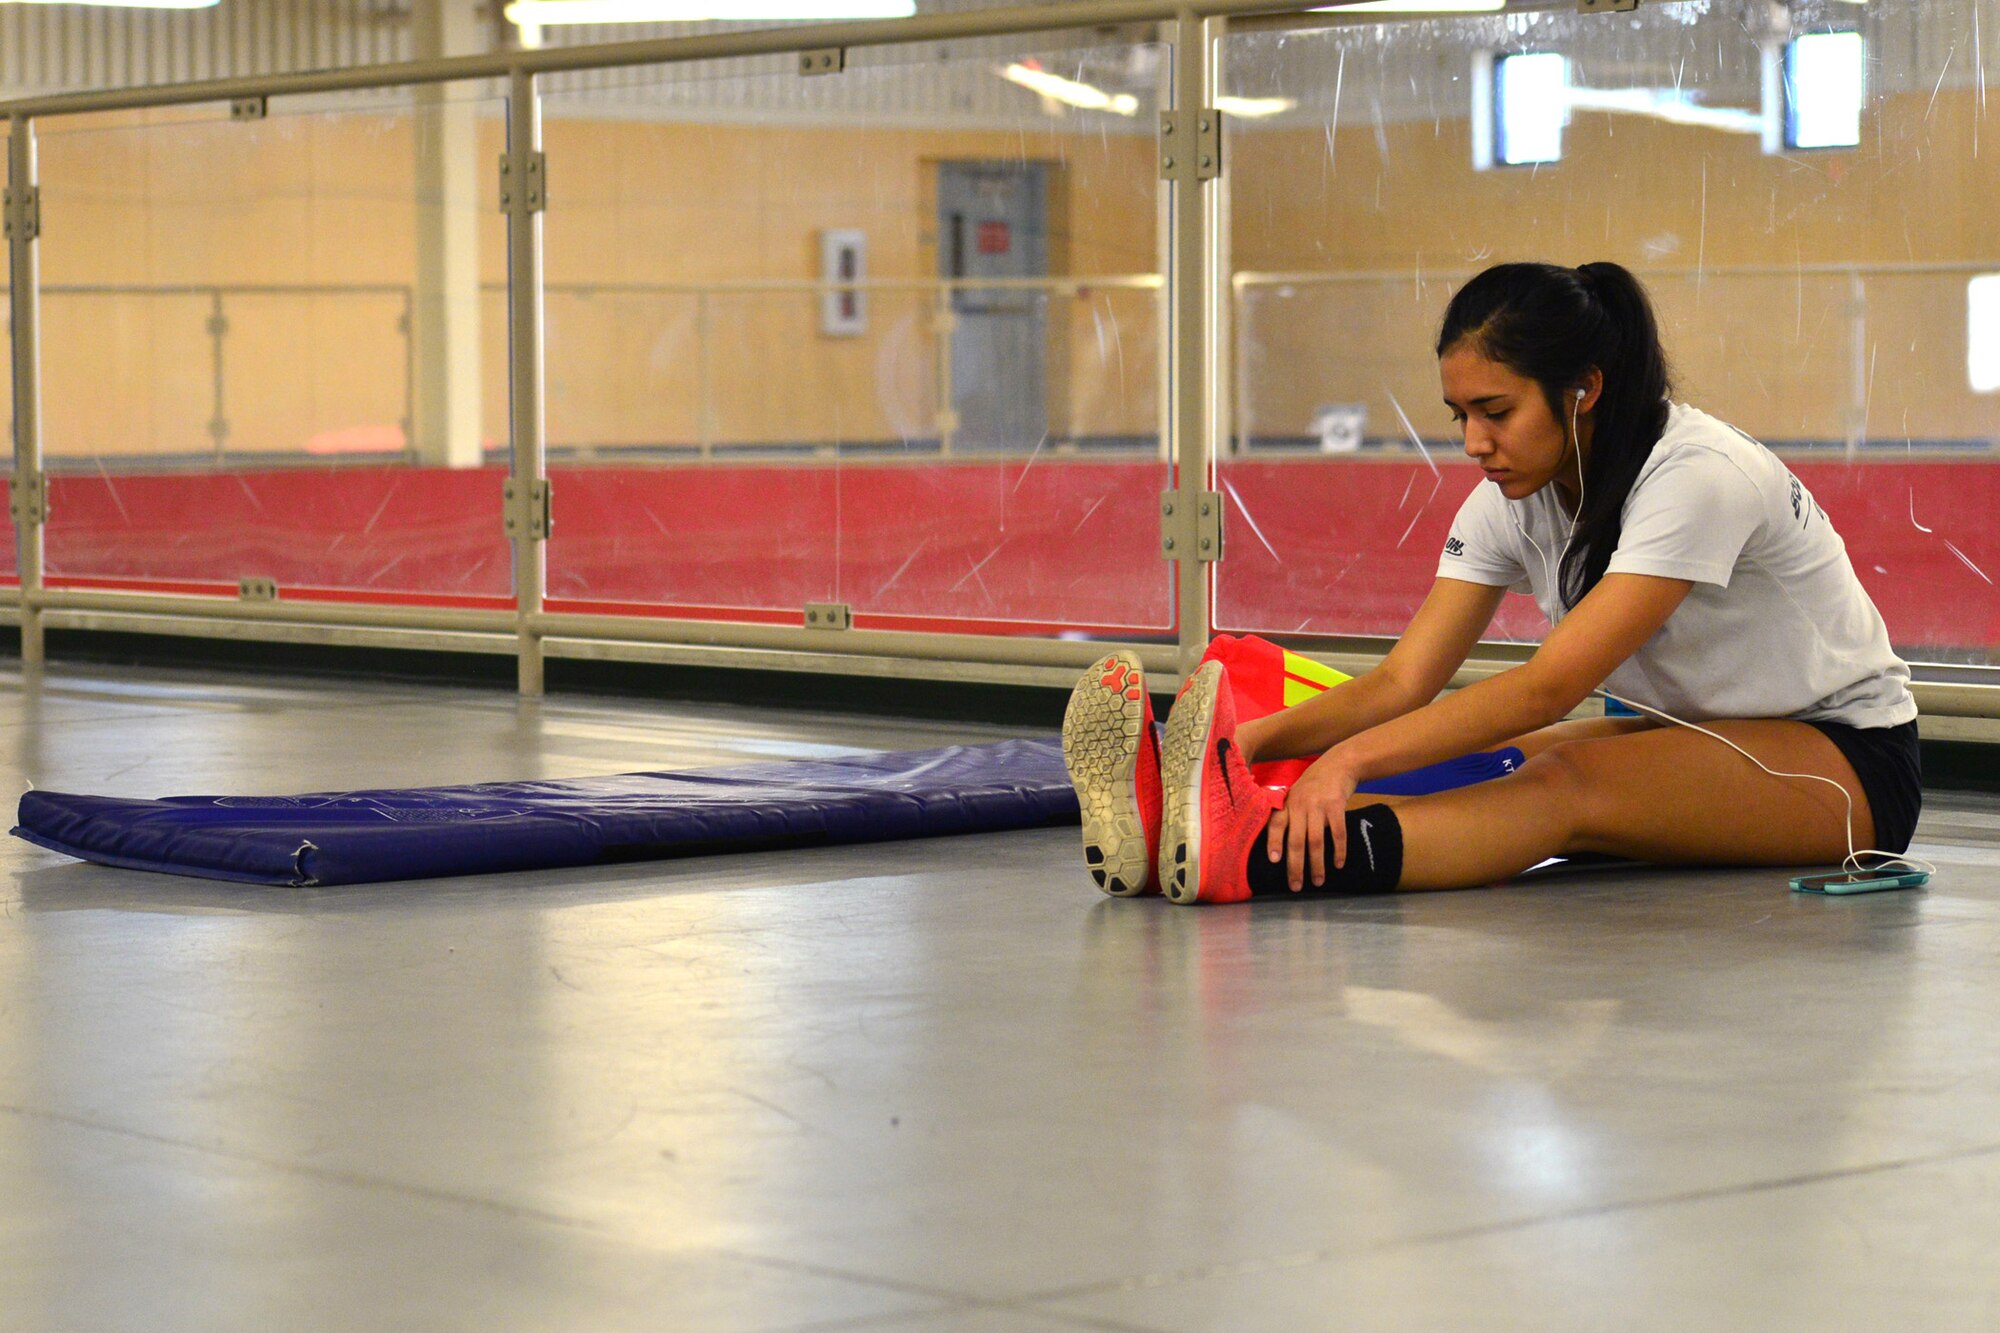 Airman 1st Class Marissa Martinez, 341st Force Support Squadron missile chef, stretches before running on the indoor track Sept 30, 2015, at Malmstrom Air Force Base, Mont. Martinez uses running to clear her mind and relieve stress from life’s day stressors. (U.S. Air Force photo/Airman Daniel Brosam)